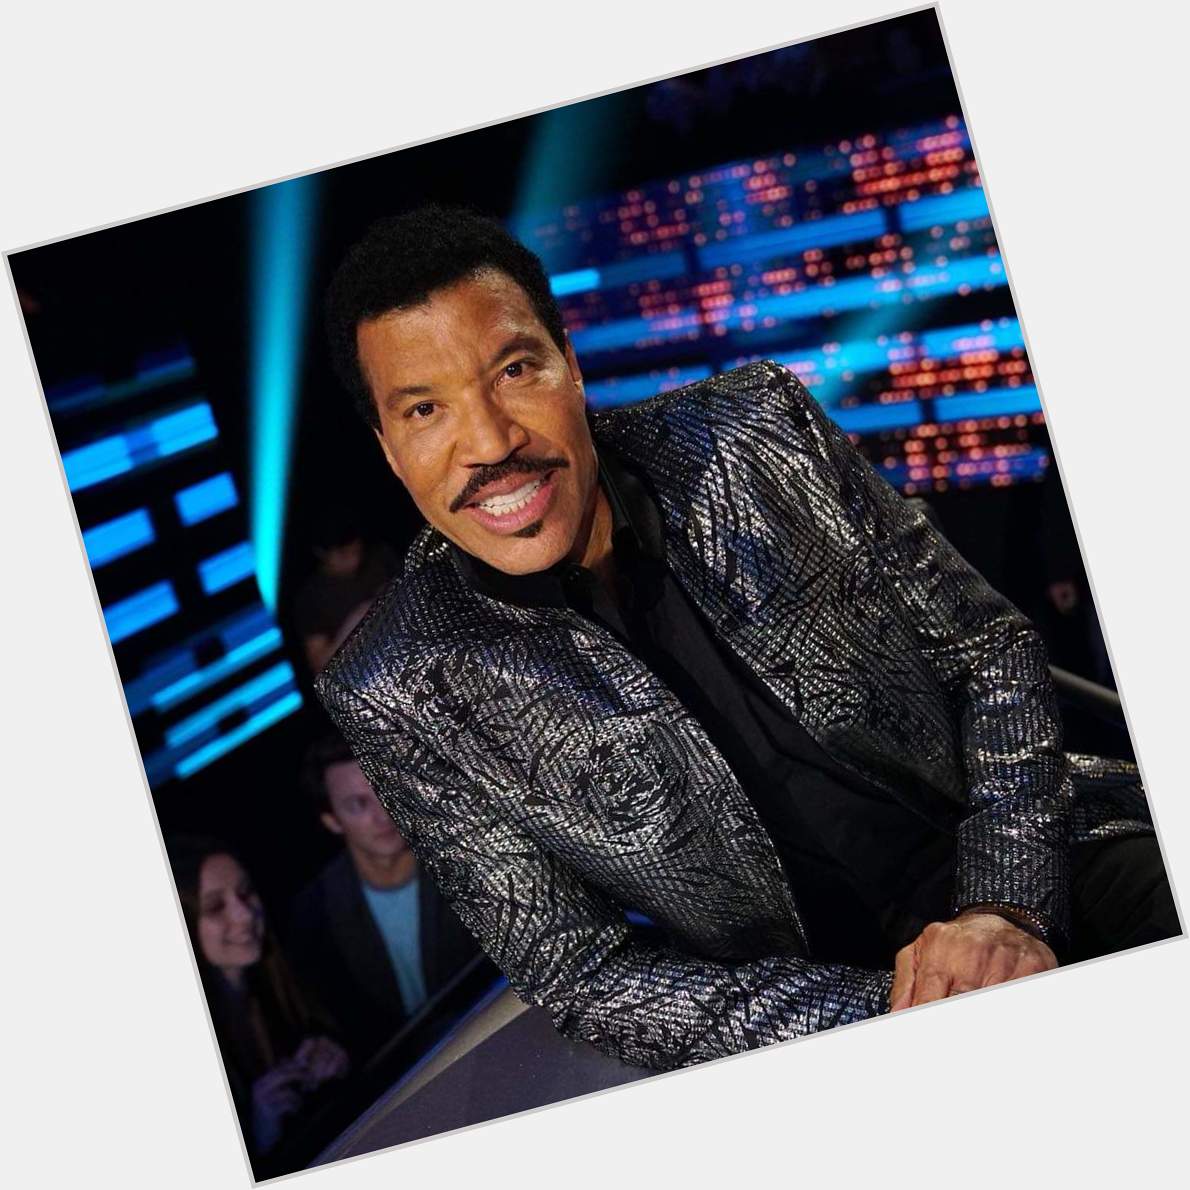 Happy Birthday To Lionel Richie Happy Father\s Day as well.
God Bless You Always.. 